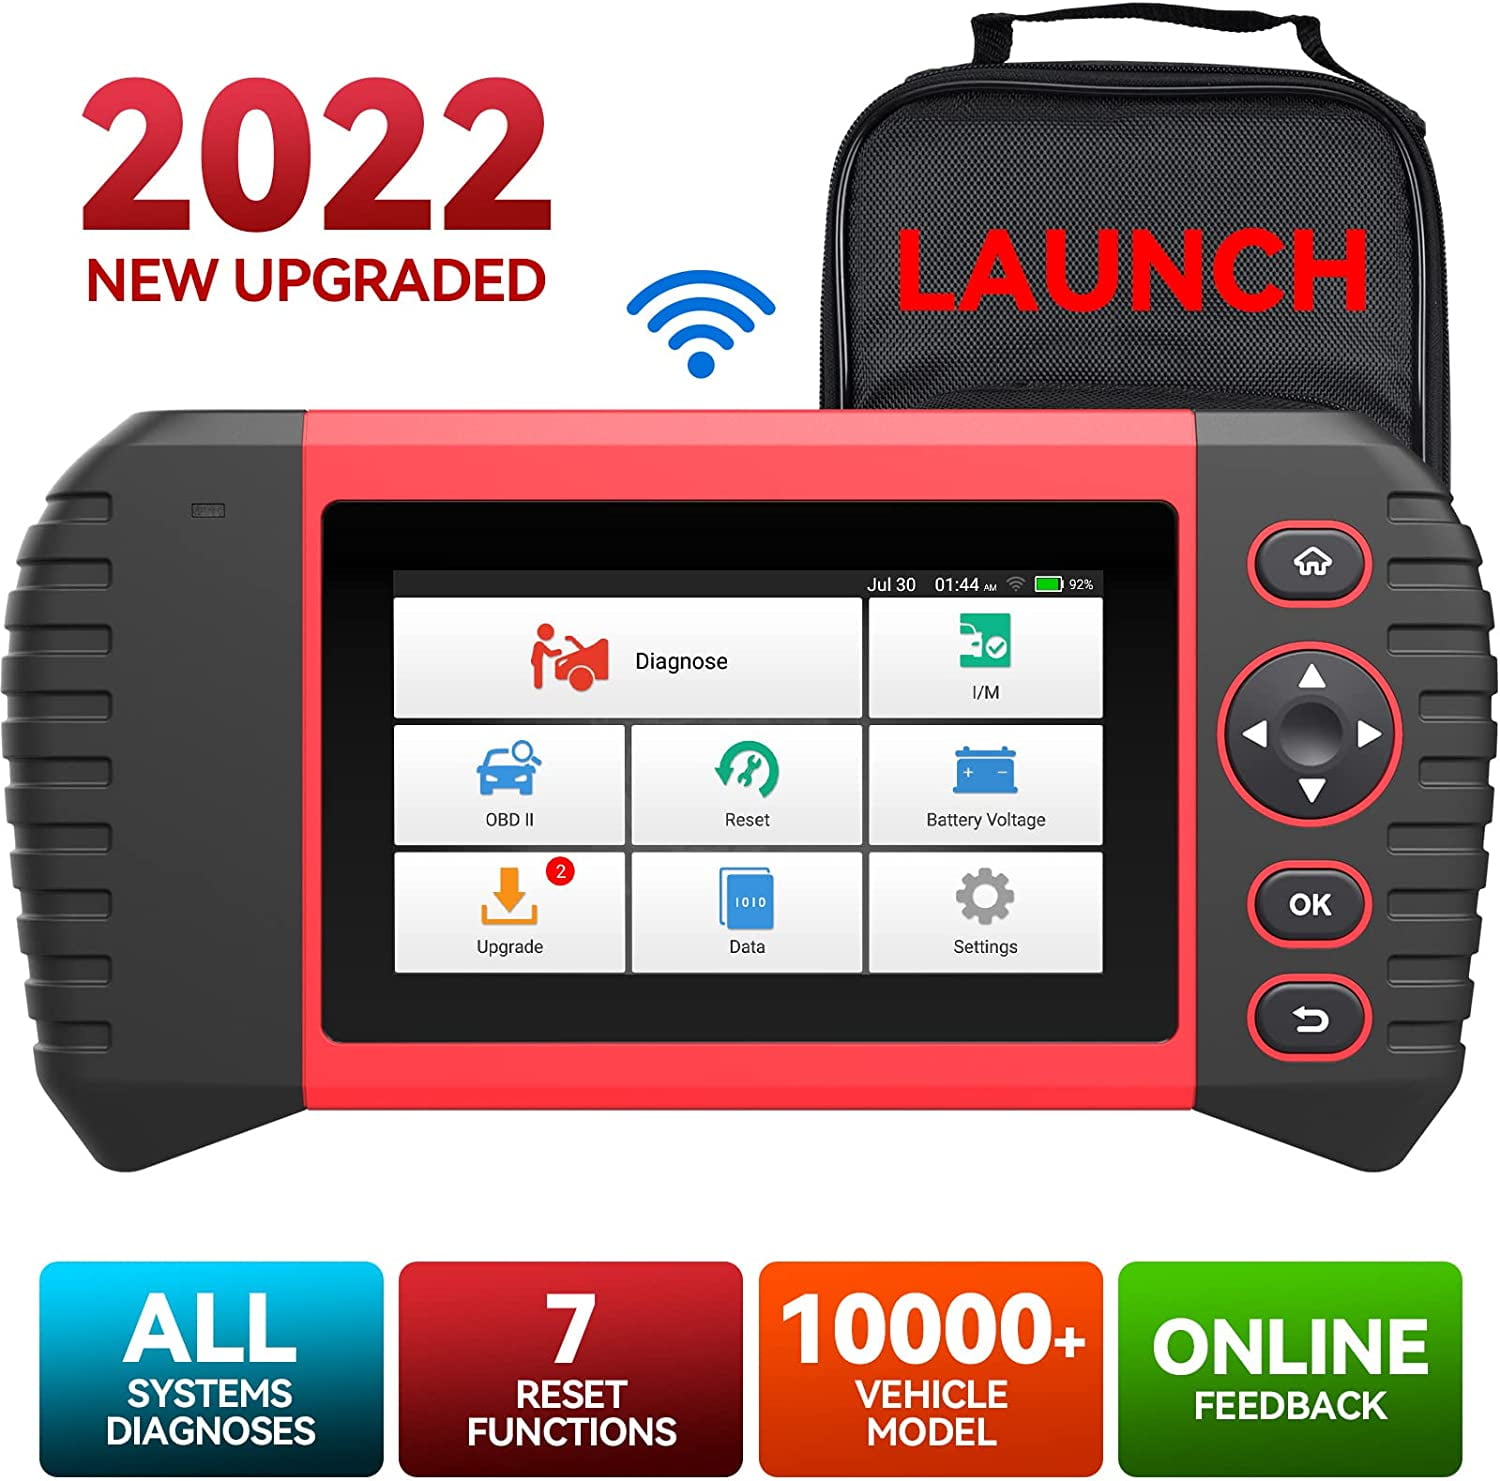 Motor EPB Öl Reset Getriebe Batterie Registrierung Launch CRP Touch Pro 5.0 Zoll Android Touch Screen OBD2 Diagnose Scan-Tool für ABS SRS 